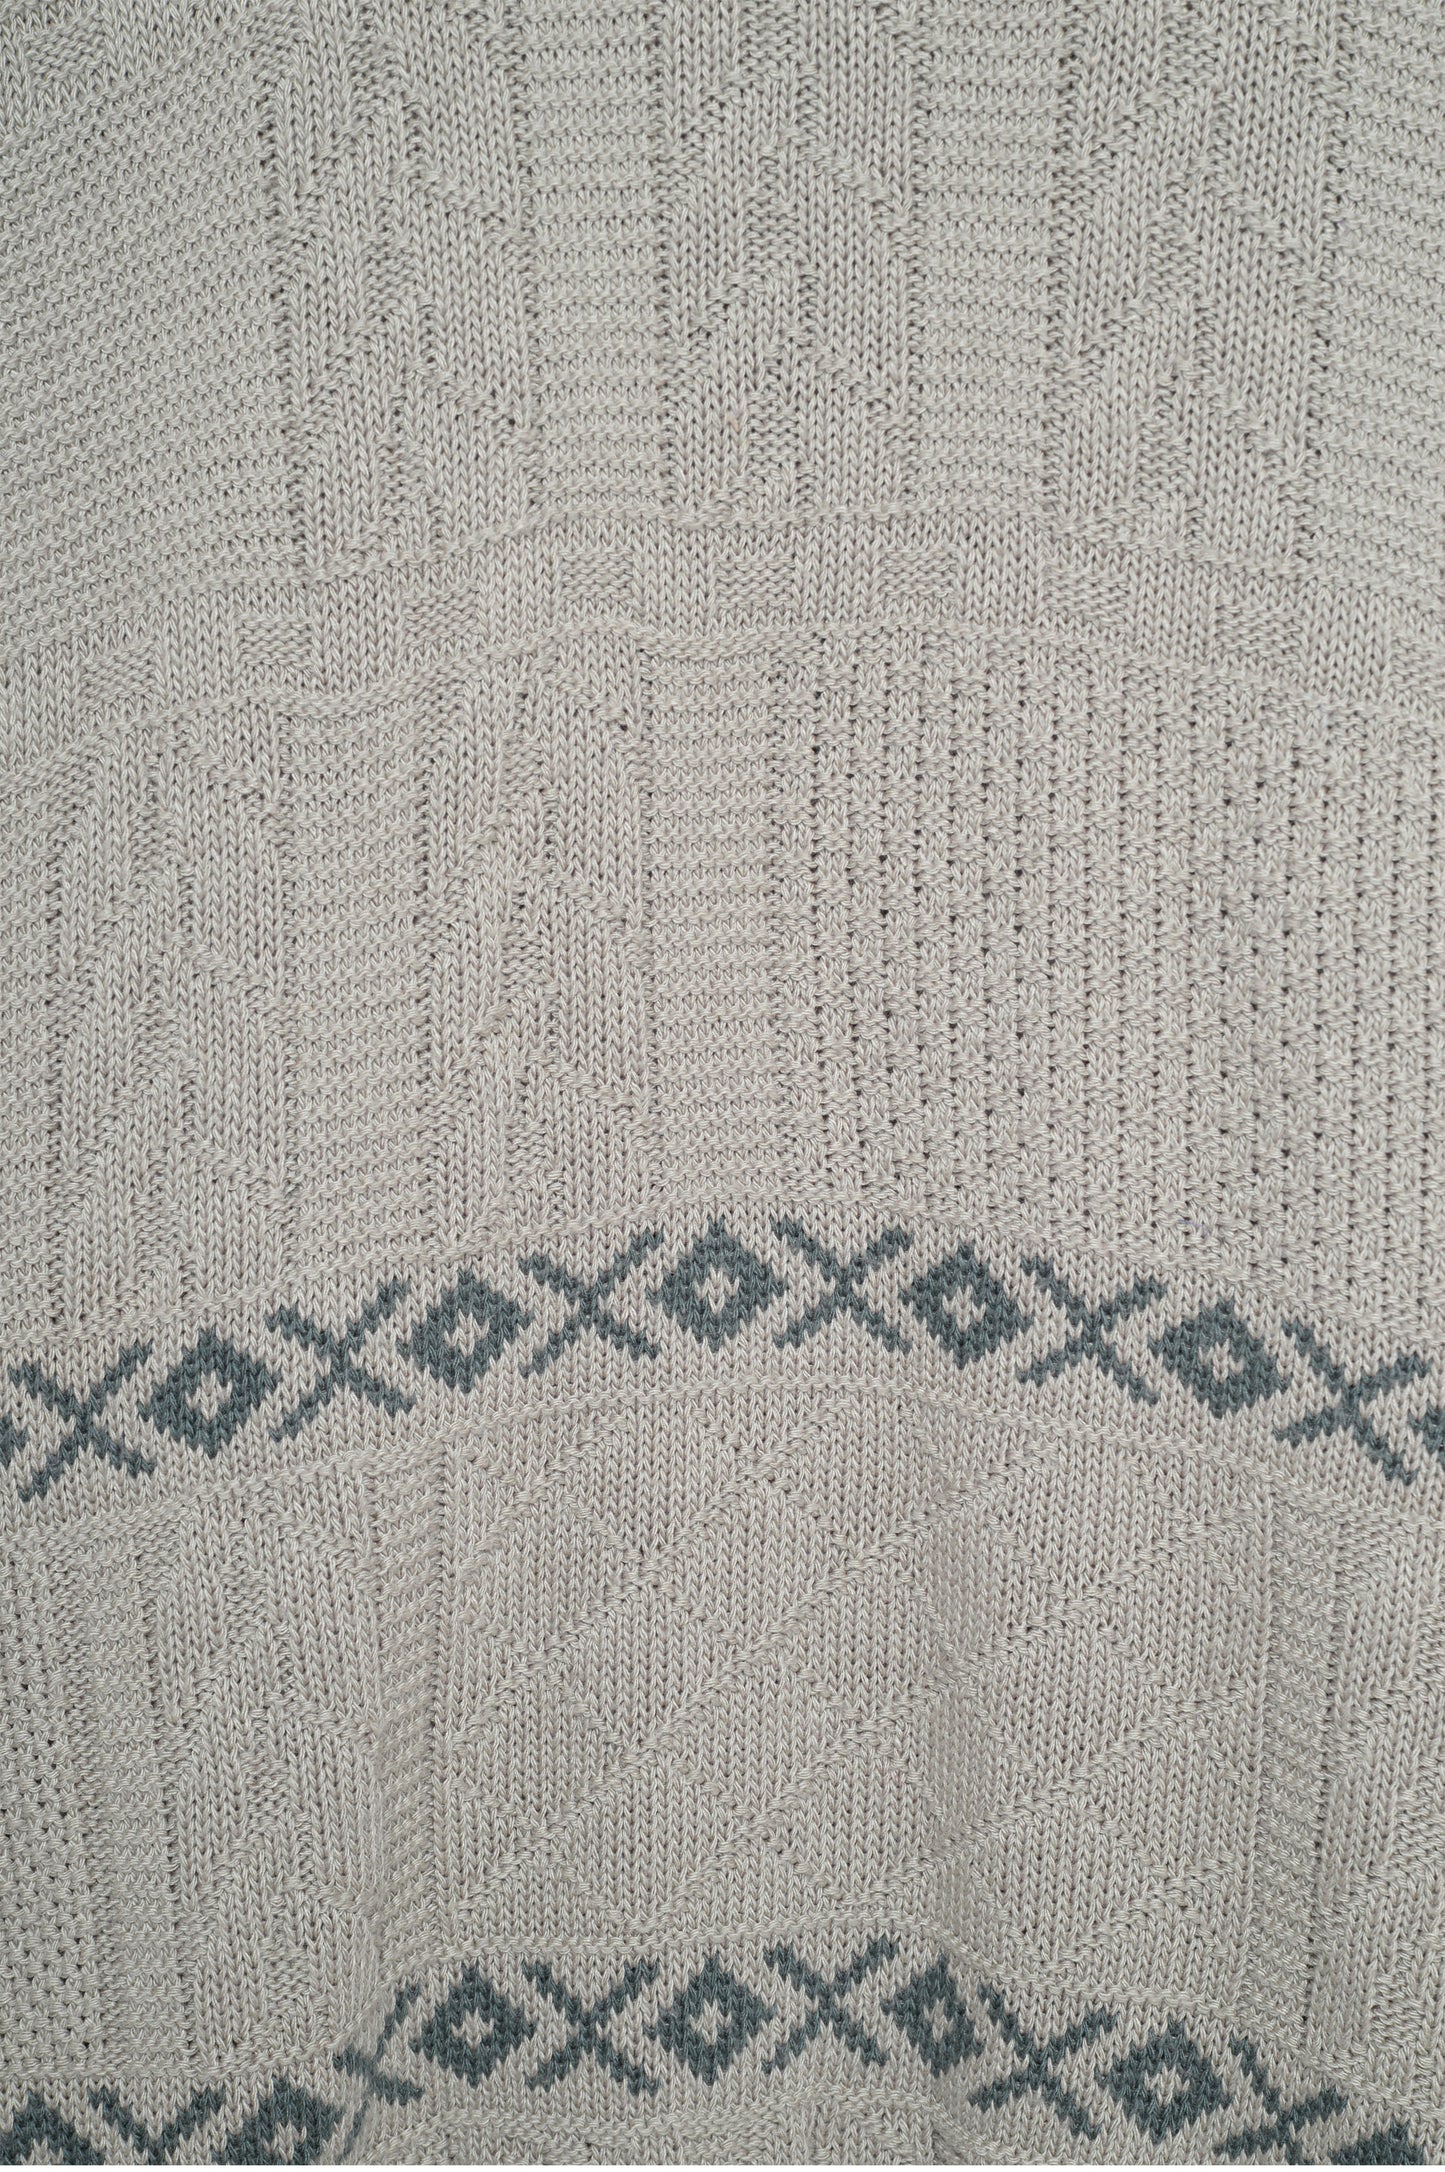 Soft Sage Cable Knit Sweater